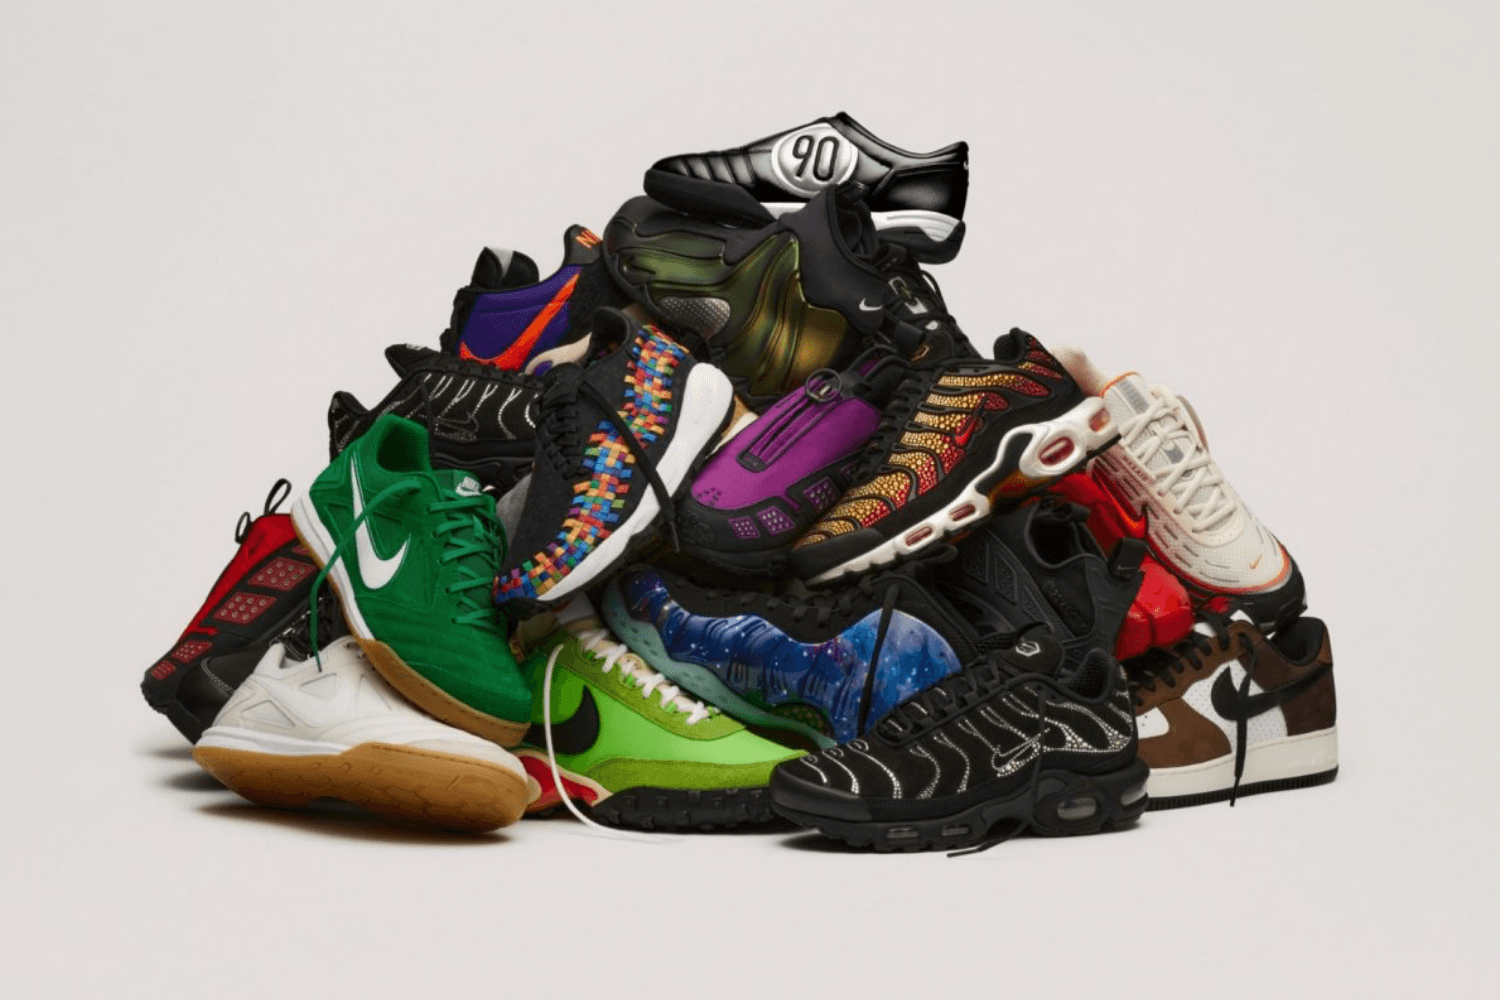 Nike presents a special sneaker line-up during SNKRS Showcase